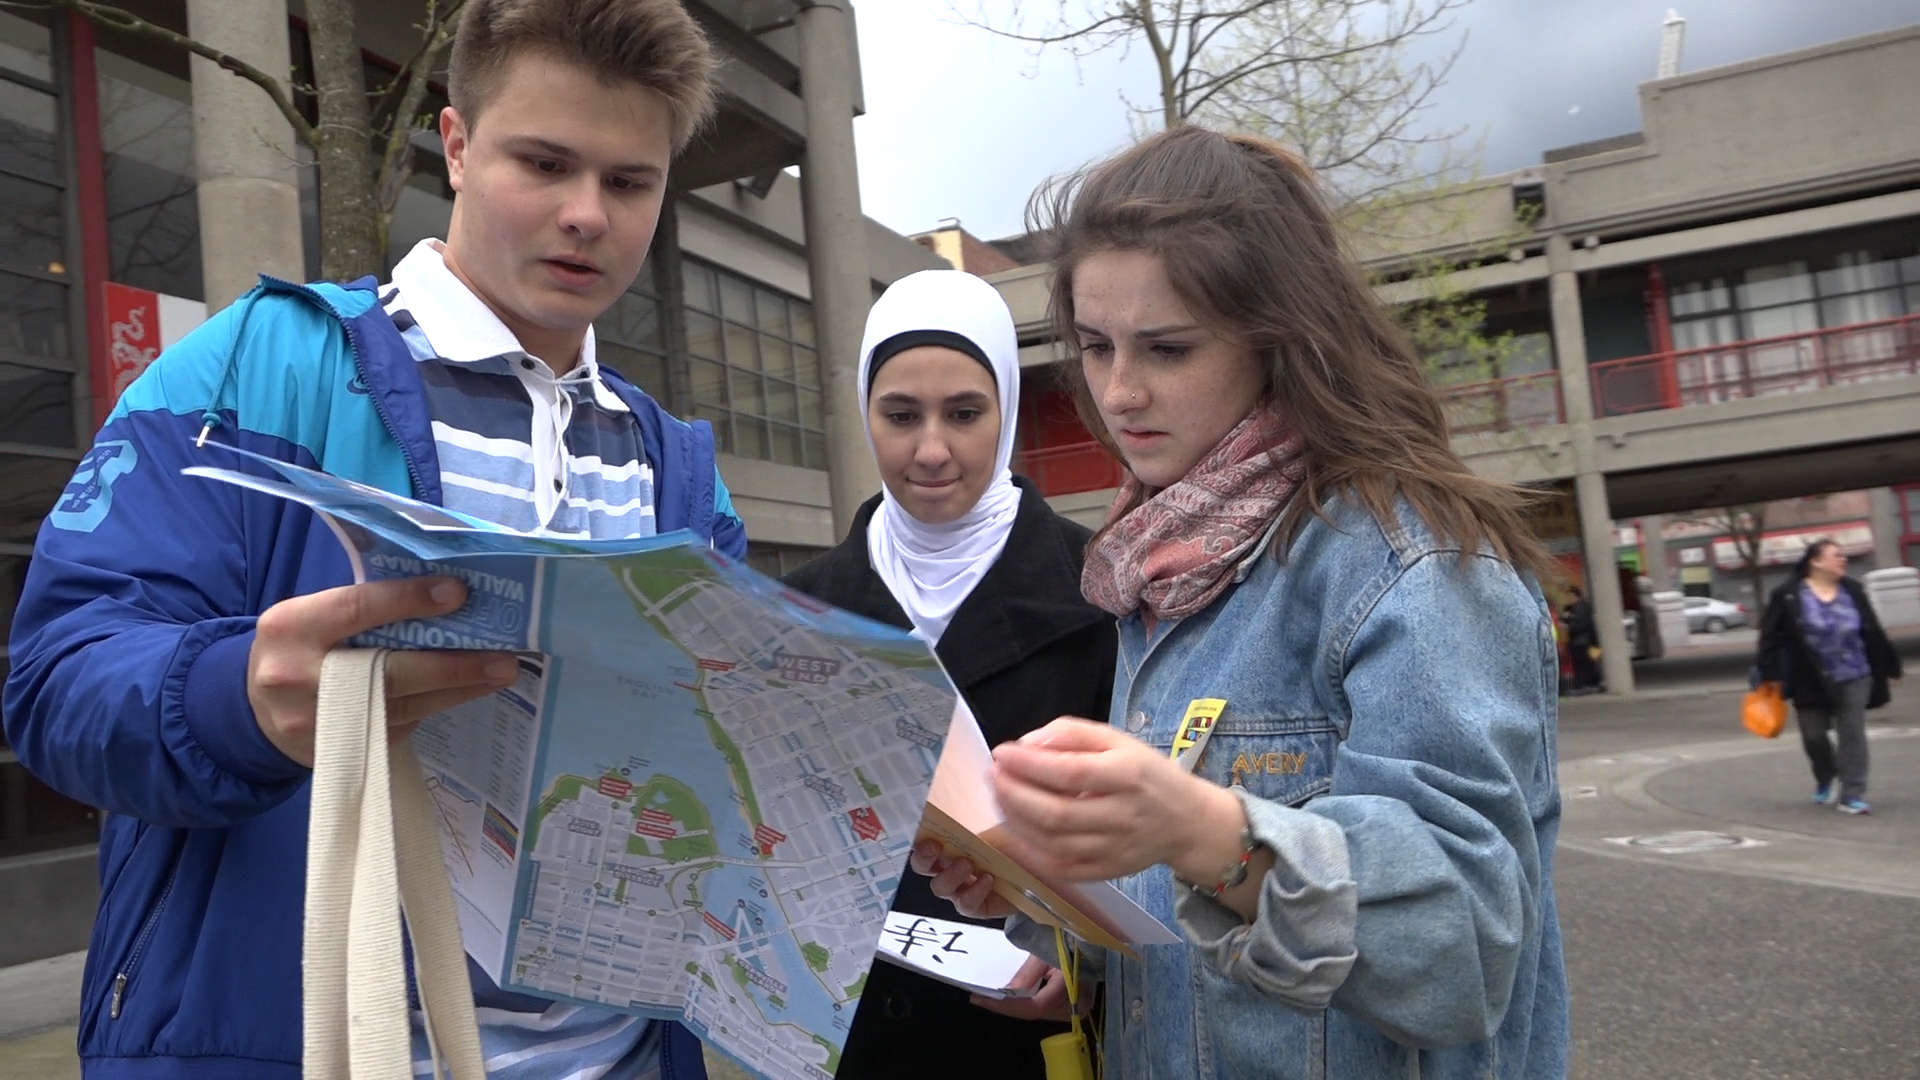 Stephen Chankov, Sujood Thraya, and Delphine Durand-Roy decide how to get to their next challenge.